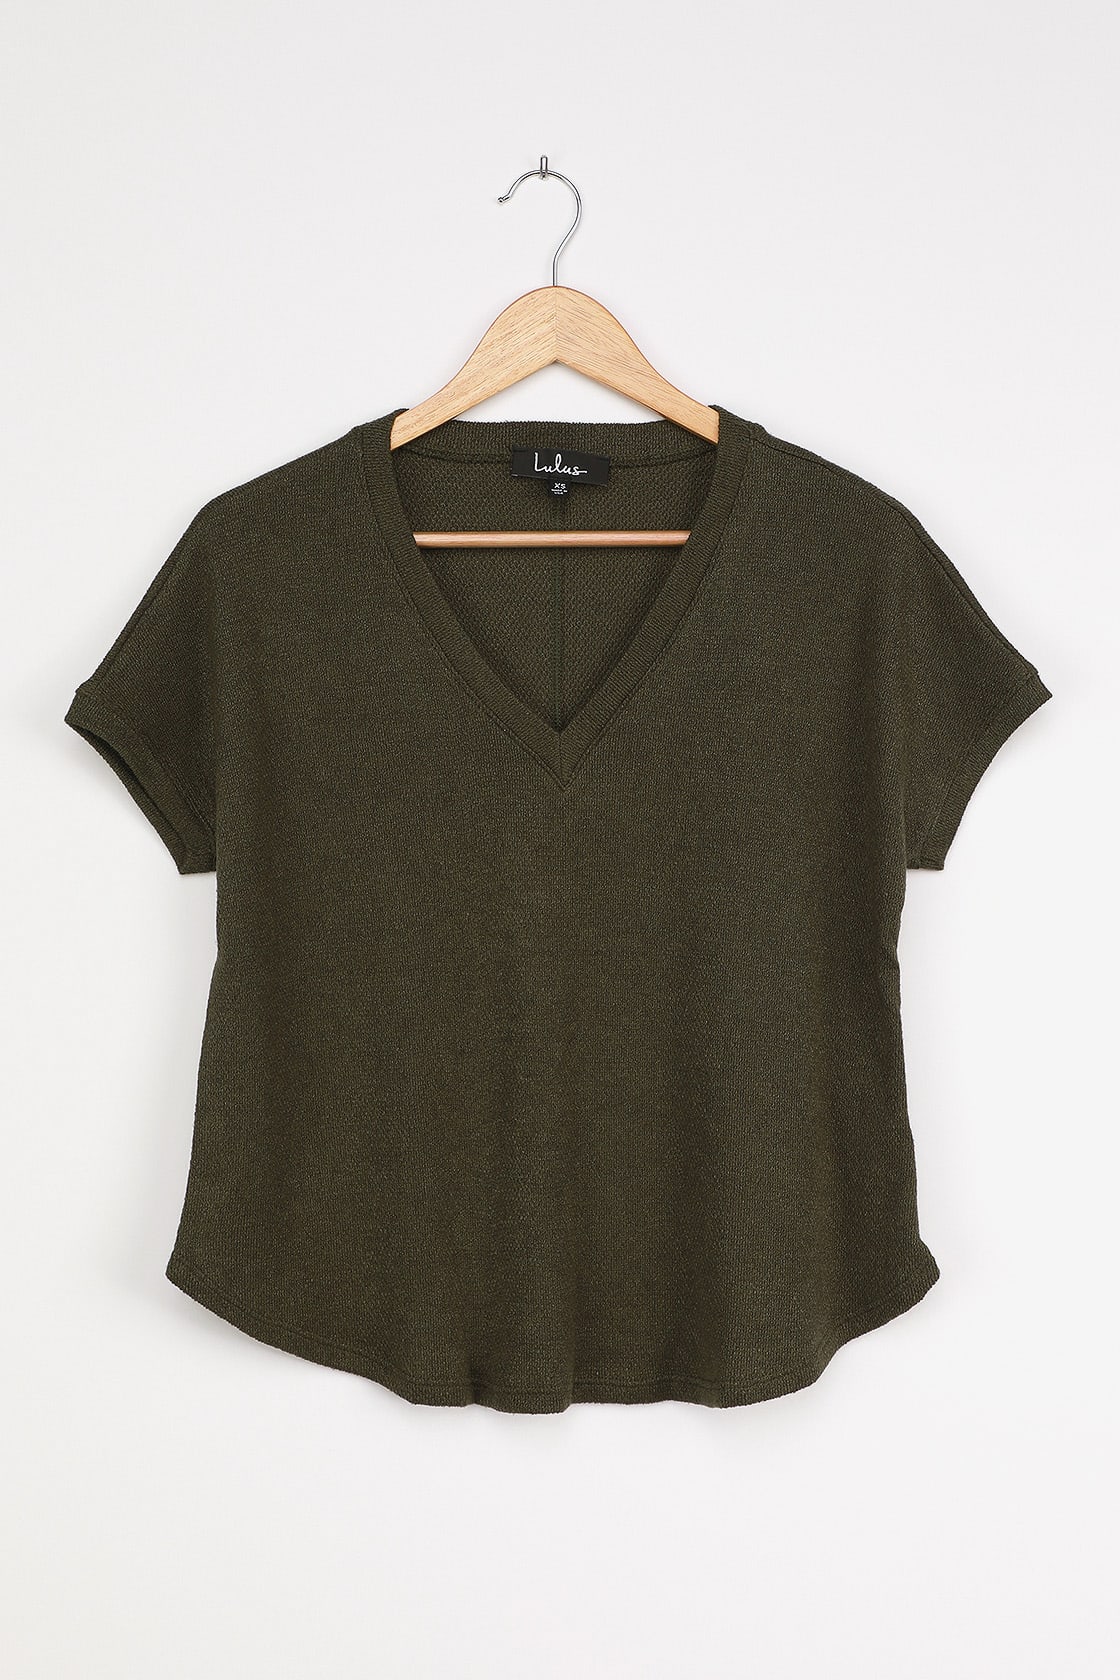 Cute Olive Green Sweater Top - V-Neck Sweater Top - Knit T-Shirt - Lulus